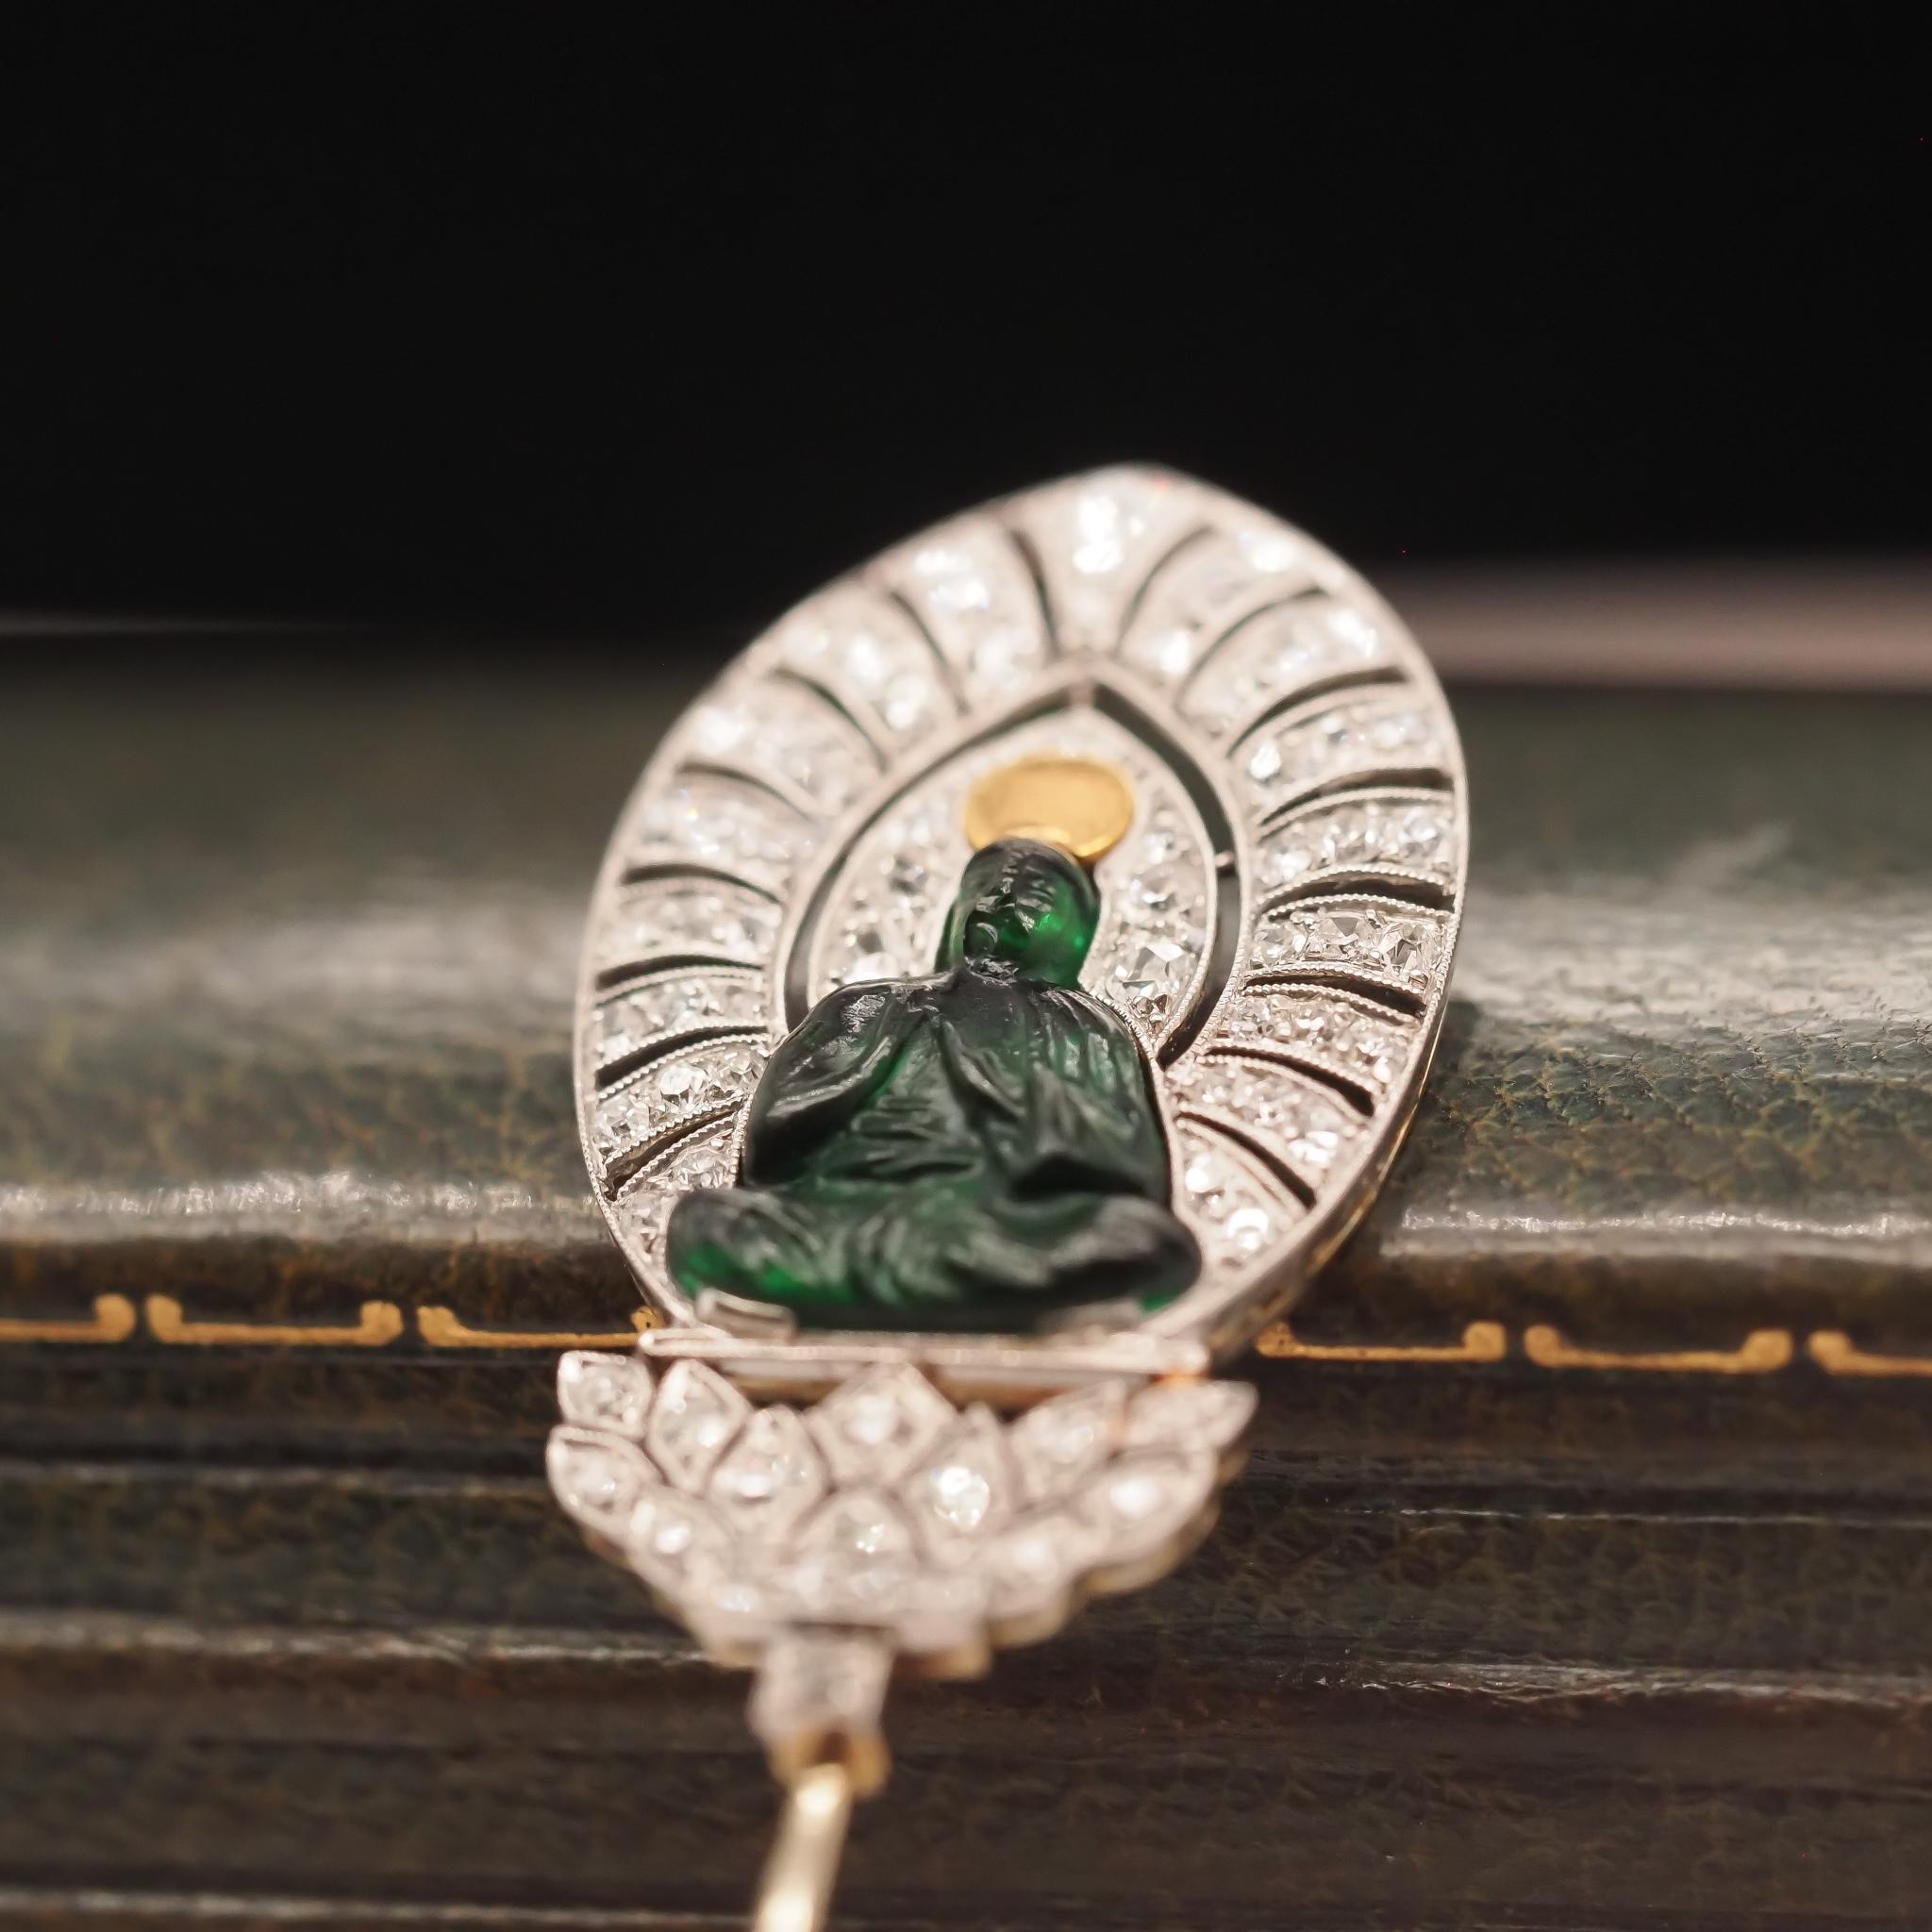 Circa 1900s Theodule Boudier French Jabot Pin with Buddha For Sale 4